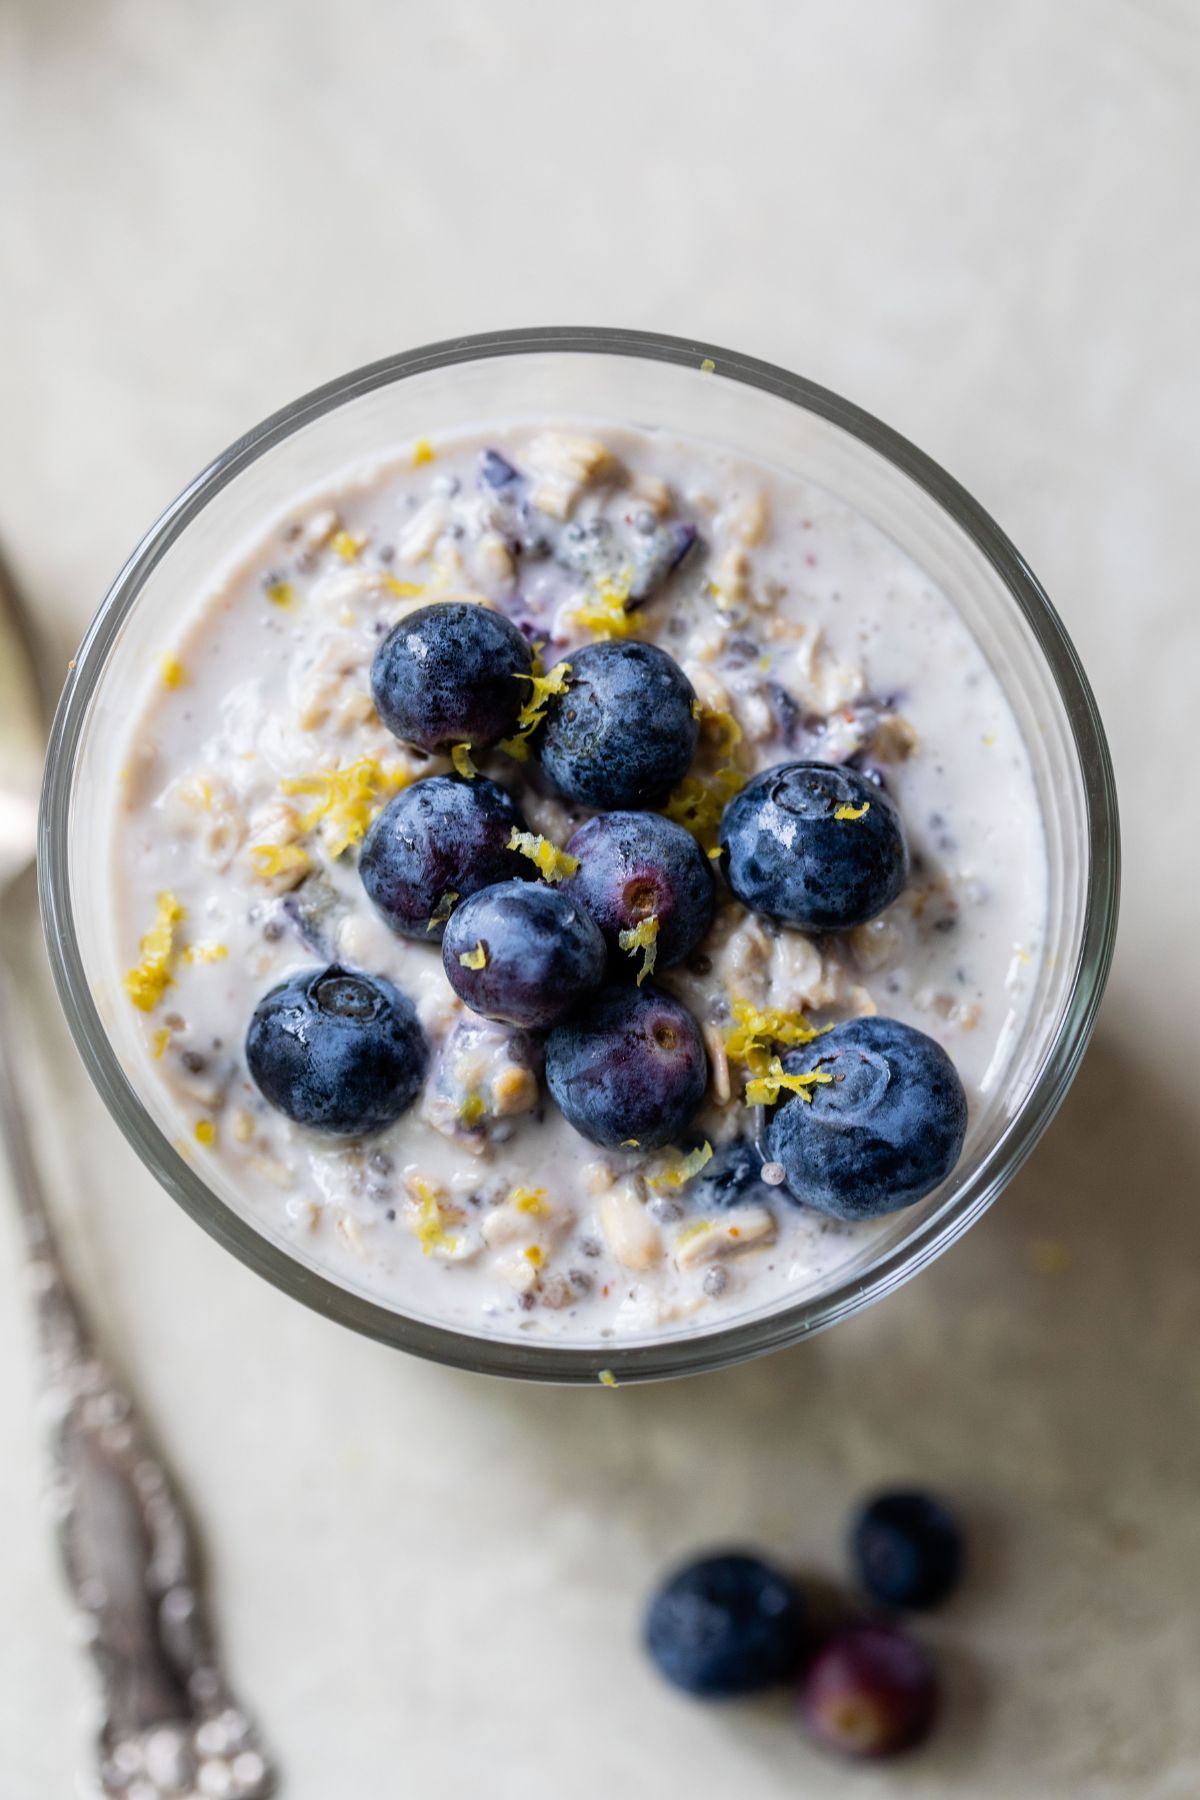 Overhead image of overnight oats in a glass topped with blueberries and lemon zest.